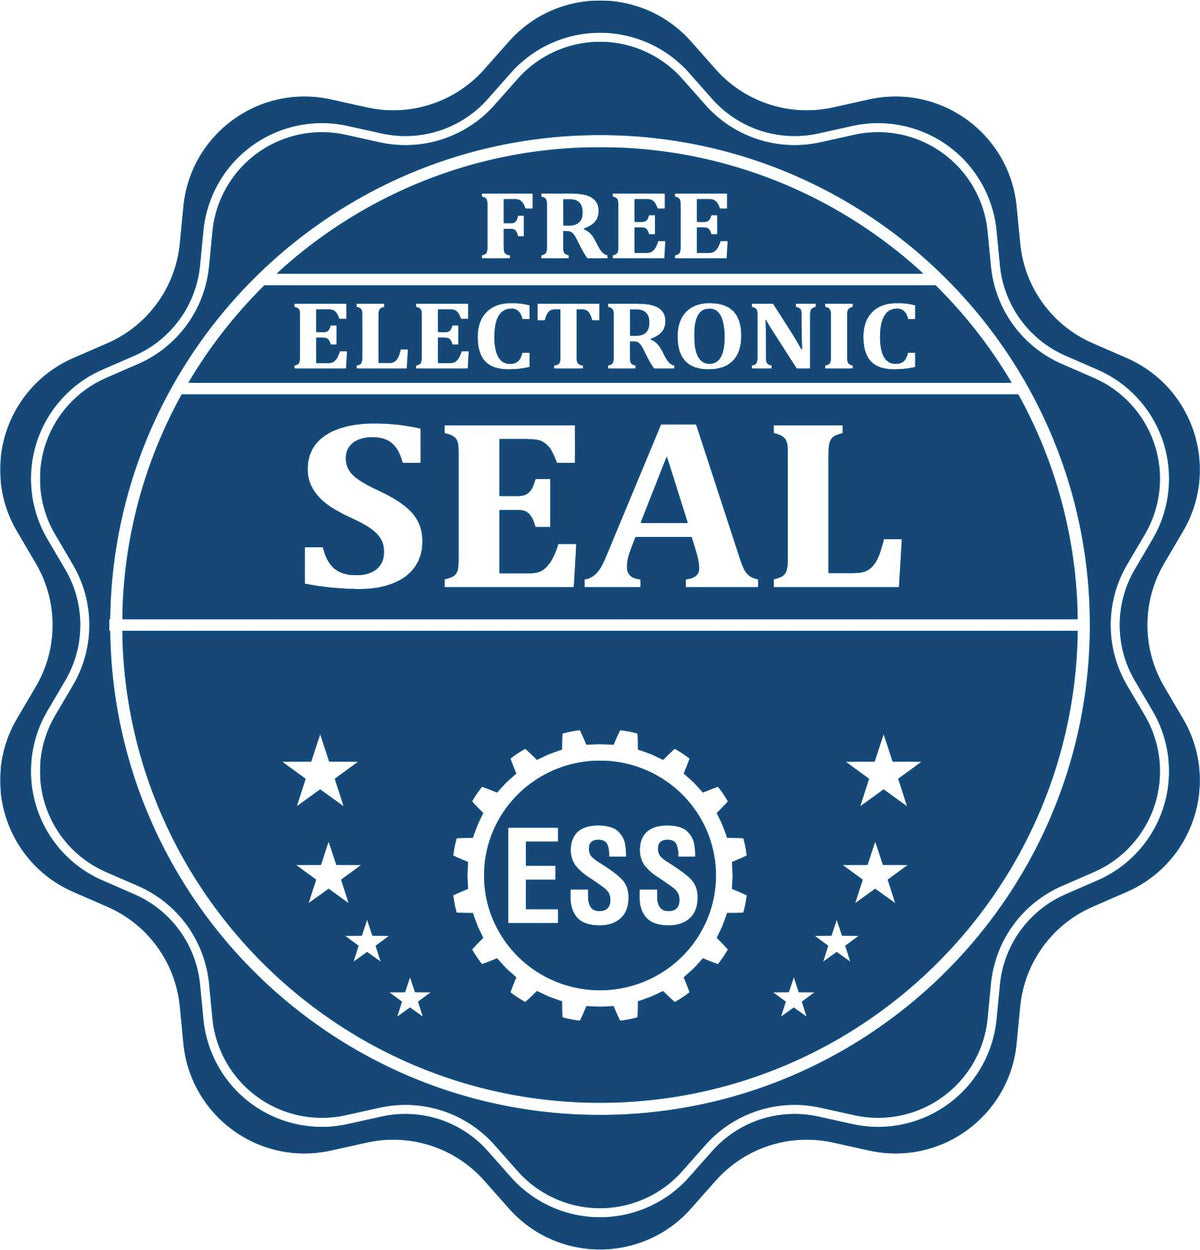 A badge showing a free electronic seal for the Guam Desk Surveyor Seal Embosser with stars and the ESS gear on the emblem.